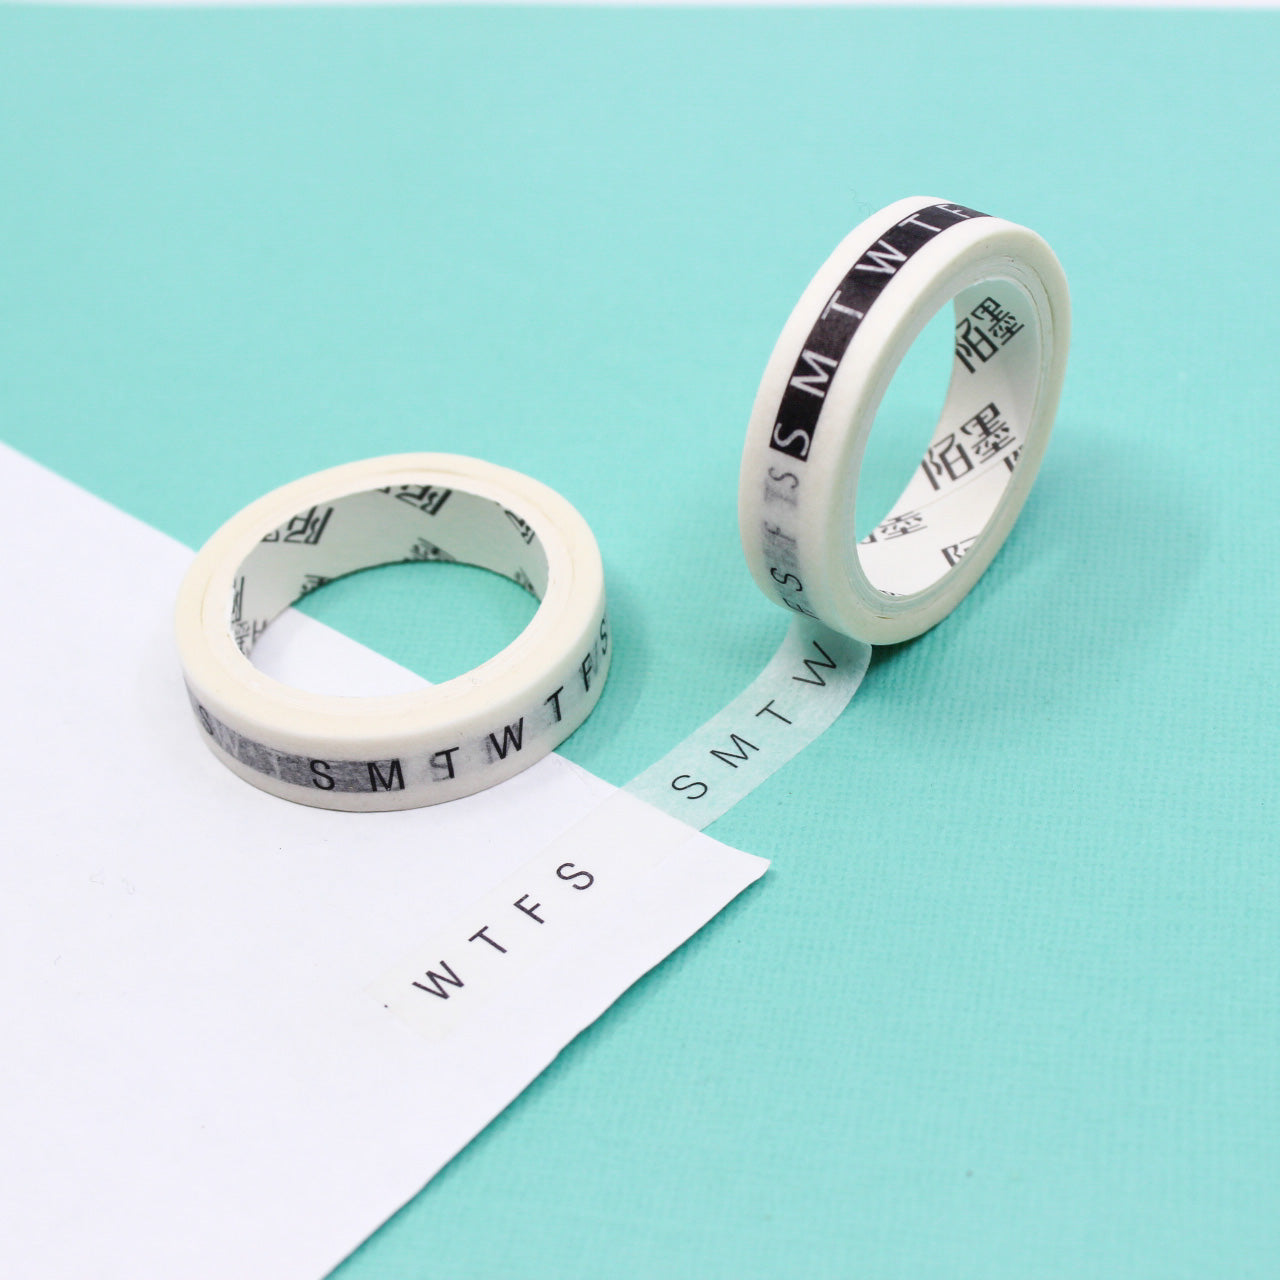 Stay organized with our Abbreviated Black and White Days of the Week Planner Washi Tape, featuring clear and concise day abbreviations. Ideal for adding a sleek and functional touch to your planner or calendar. This tape is sold at BBB Supplies Craft Shop.